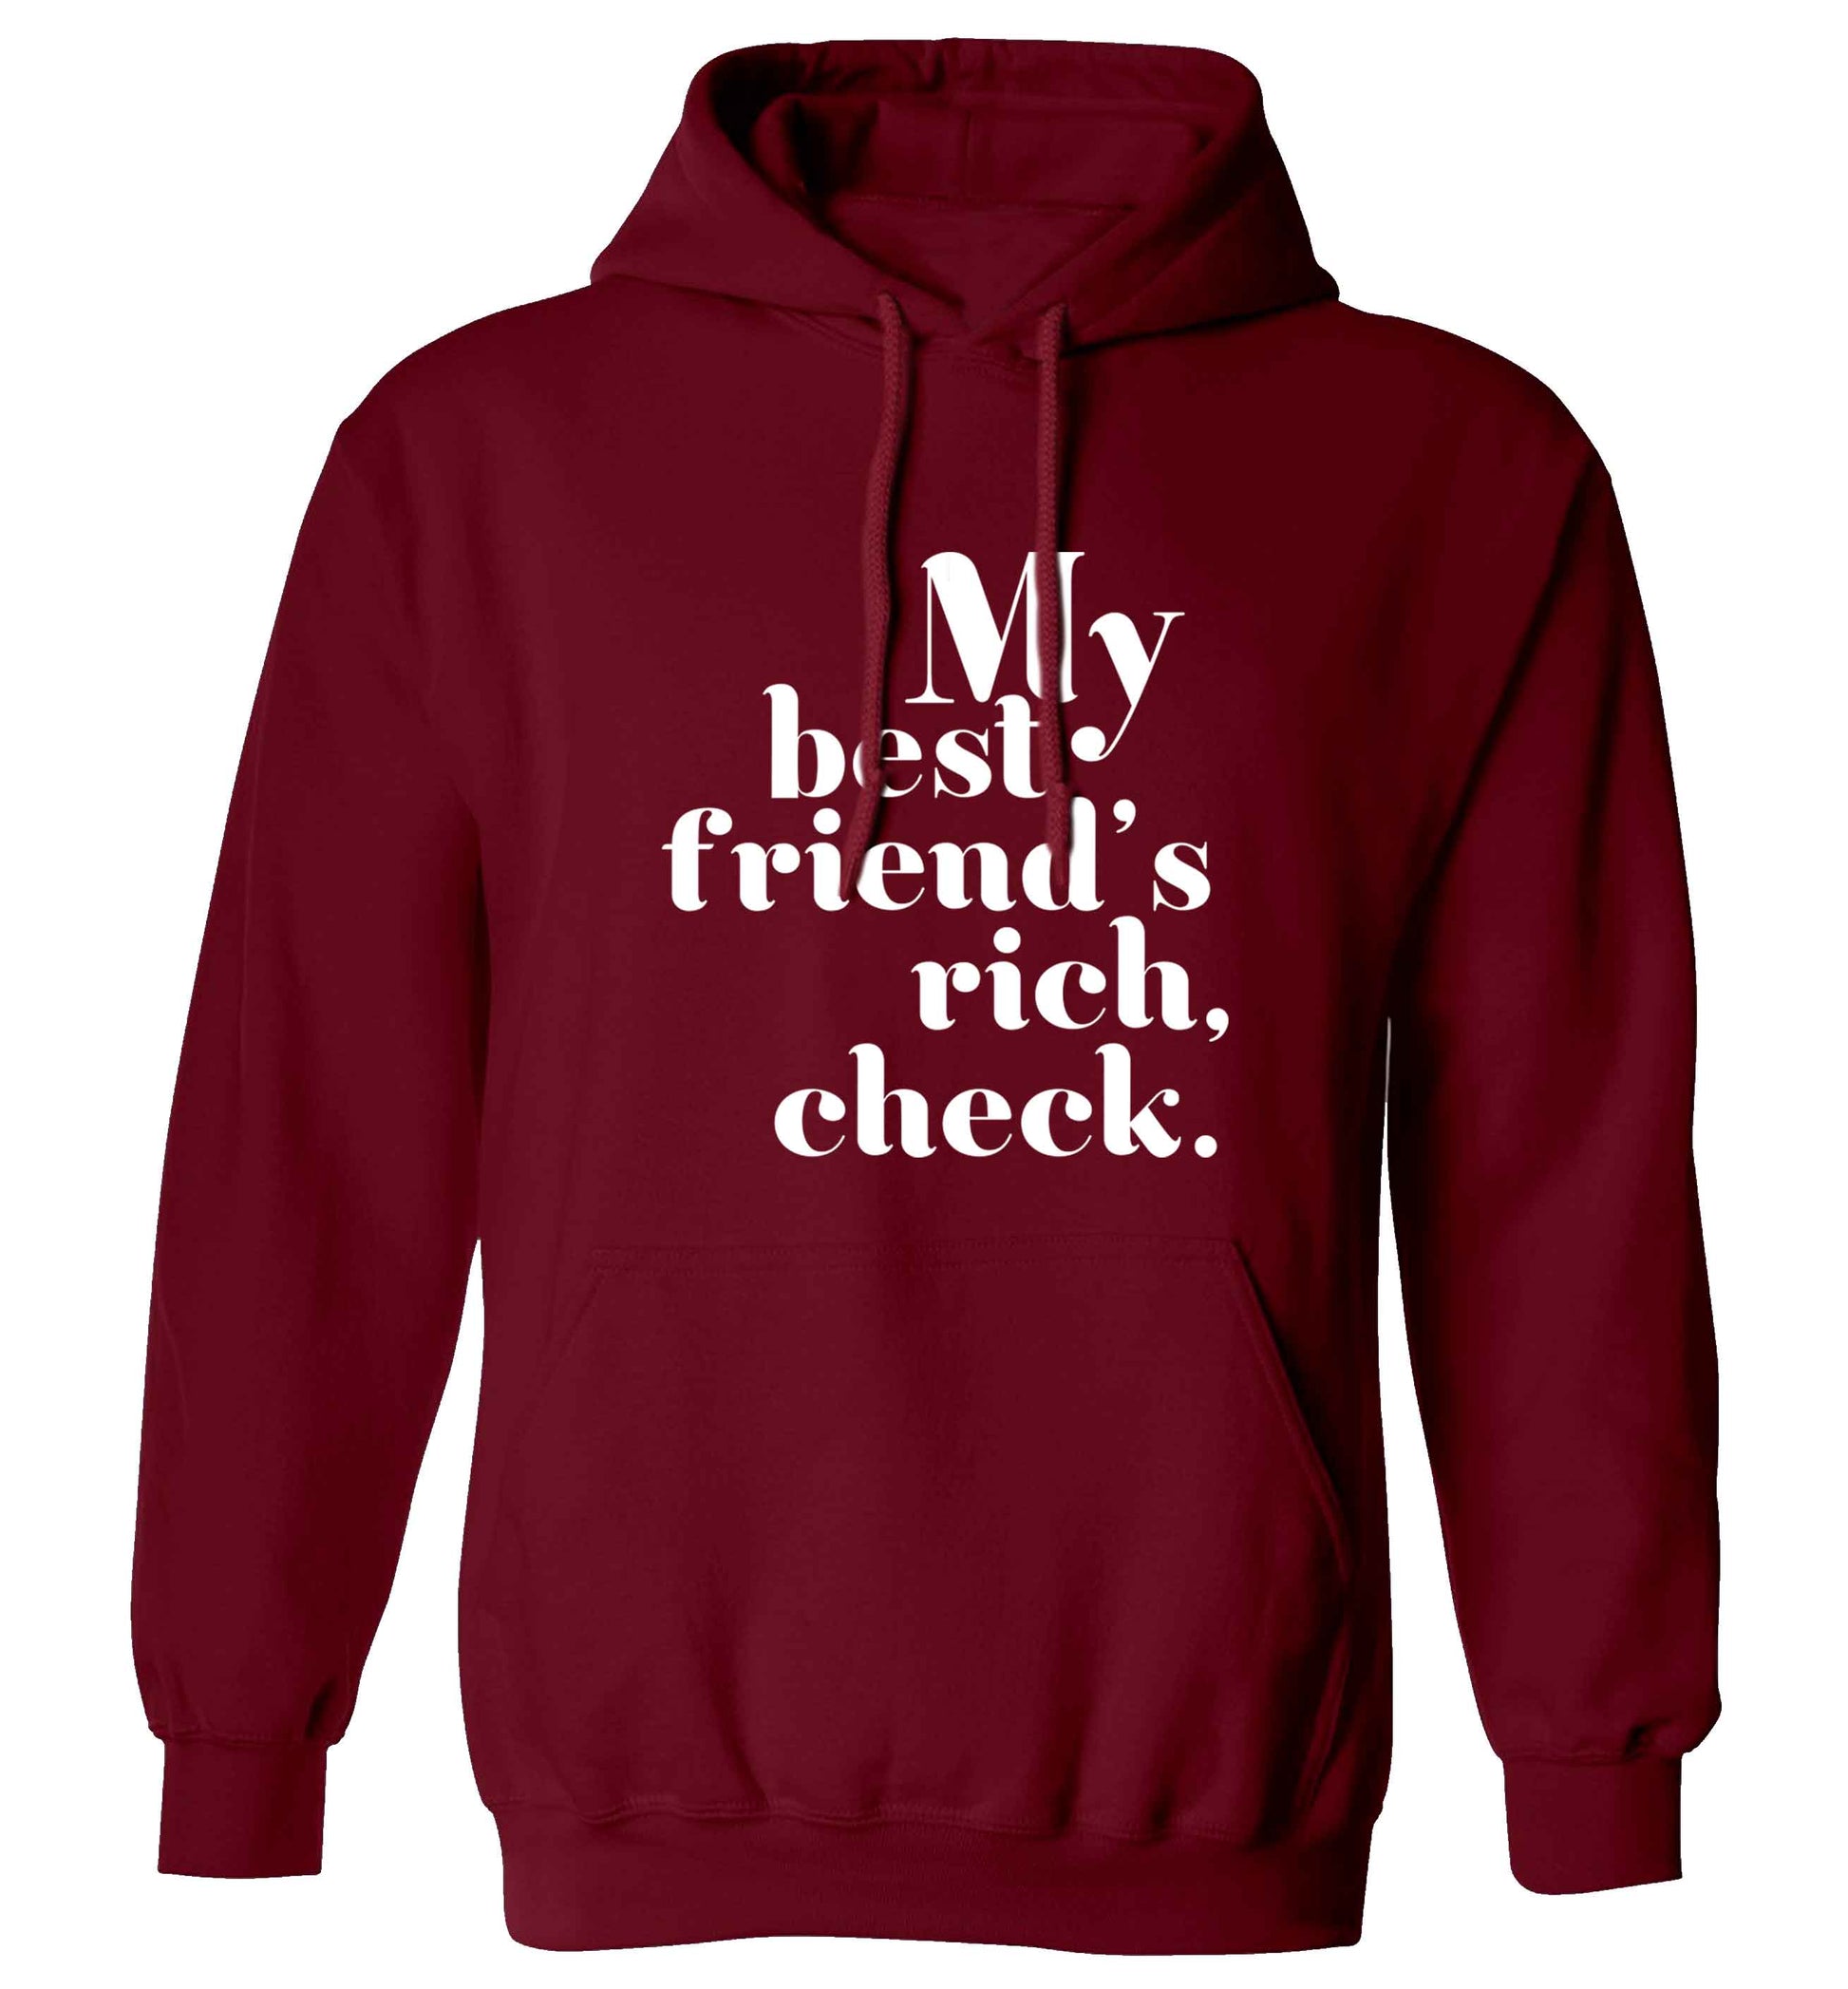 Got a rich best friend? Why not ask them to get you this, just let us  know and we'll tripple the price ;)  adults unisex maroon hoodie 2XL